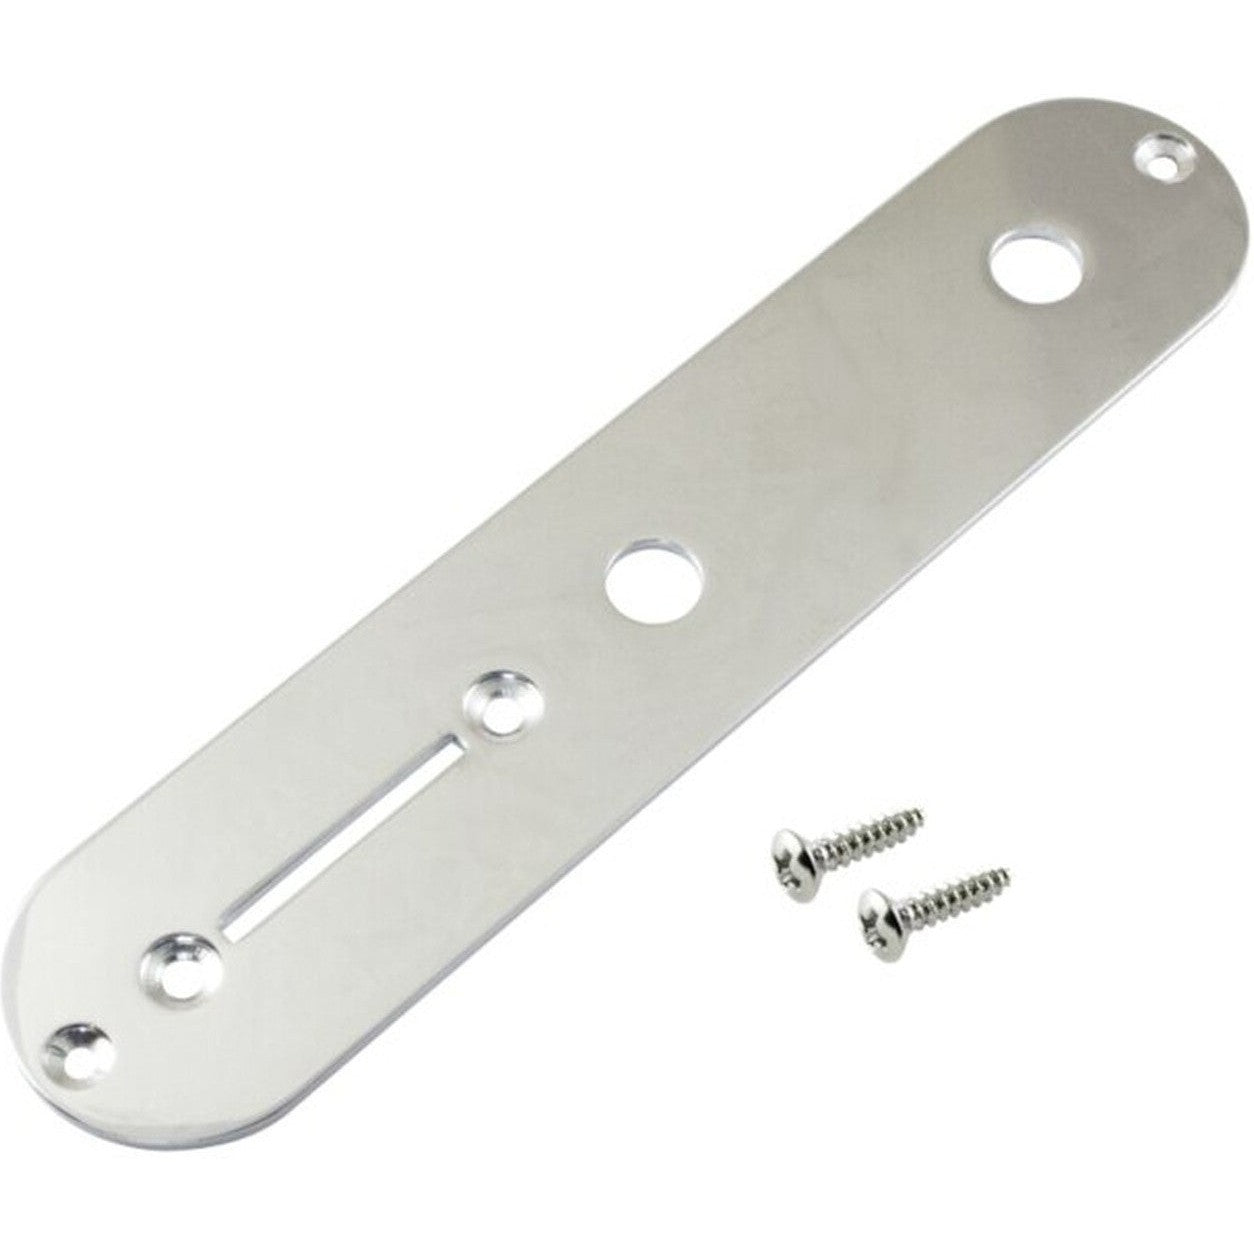 Control Plate Telecaster Tele Style Chrome With Screws